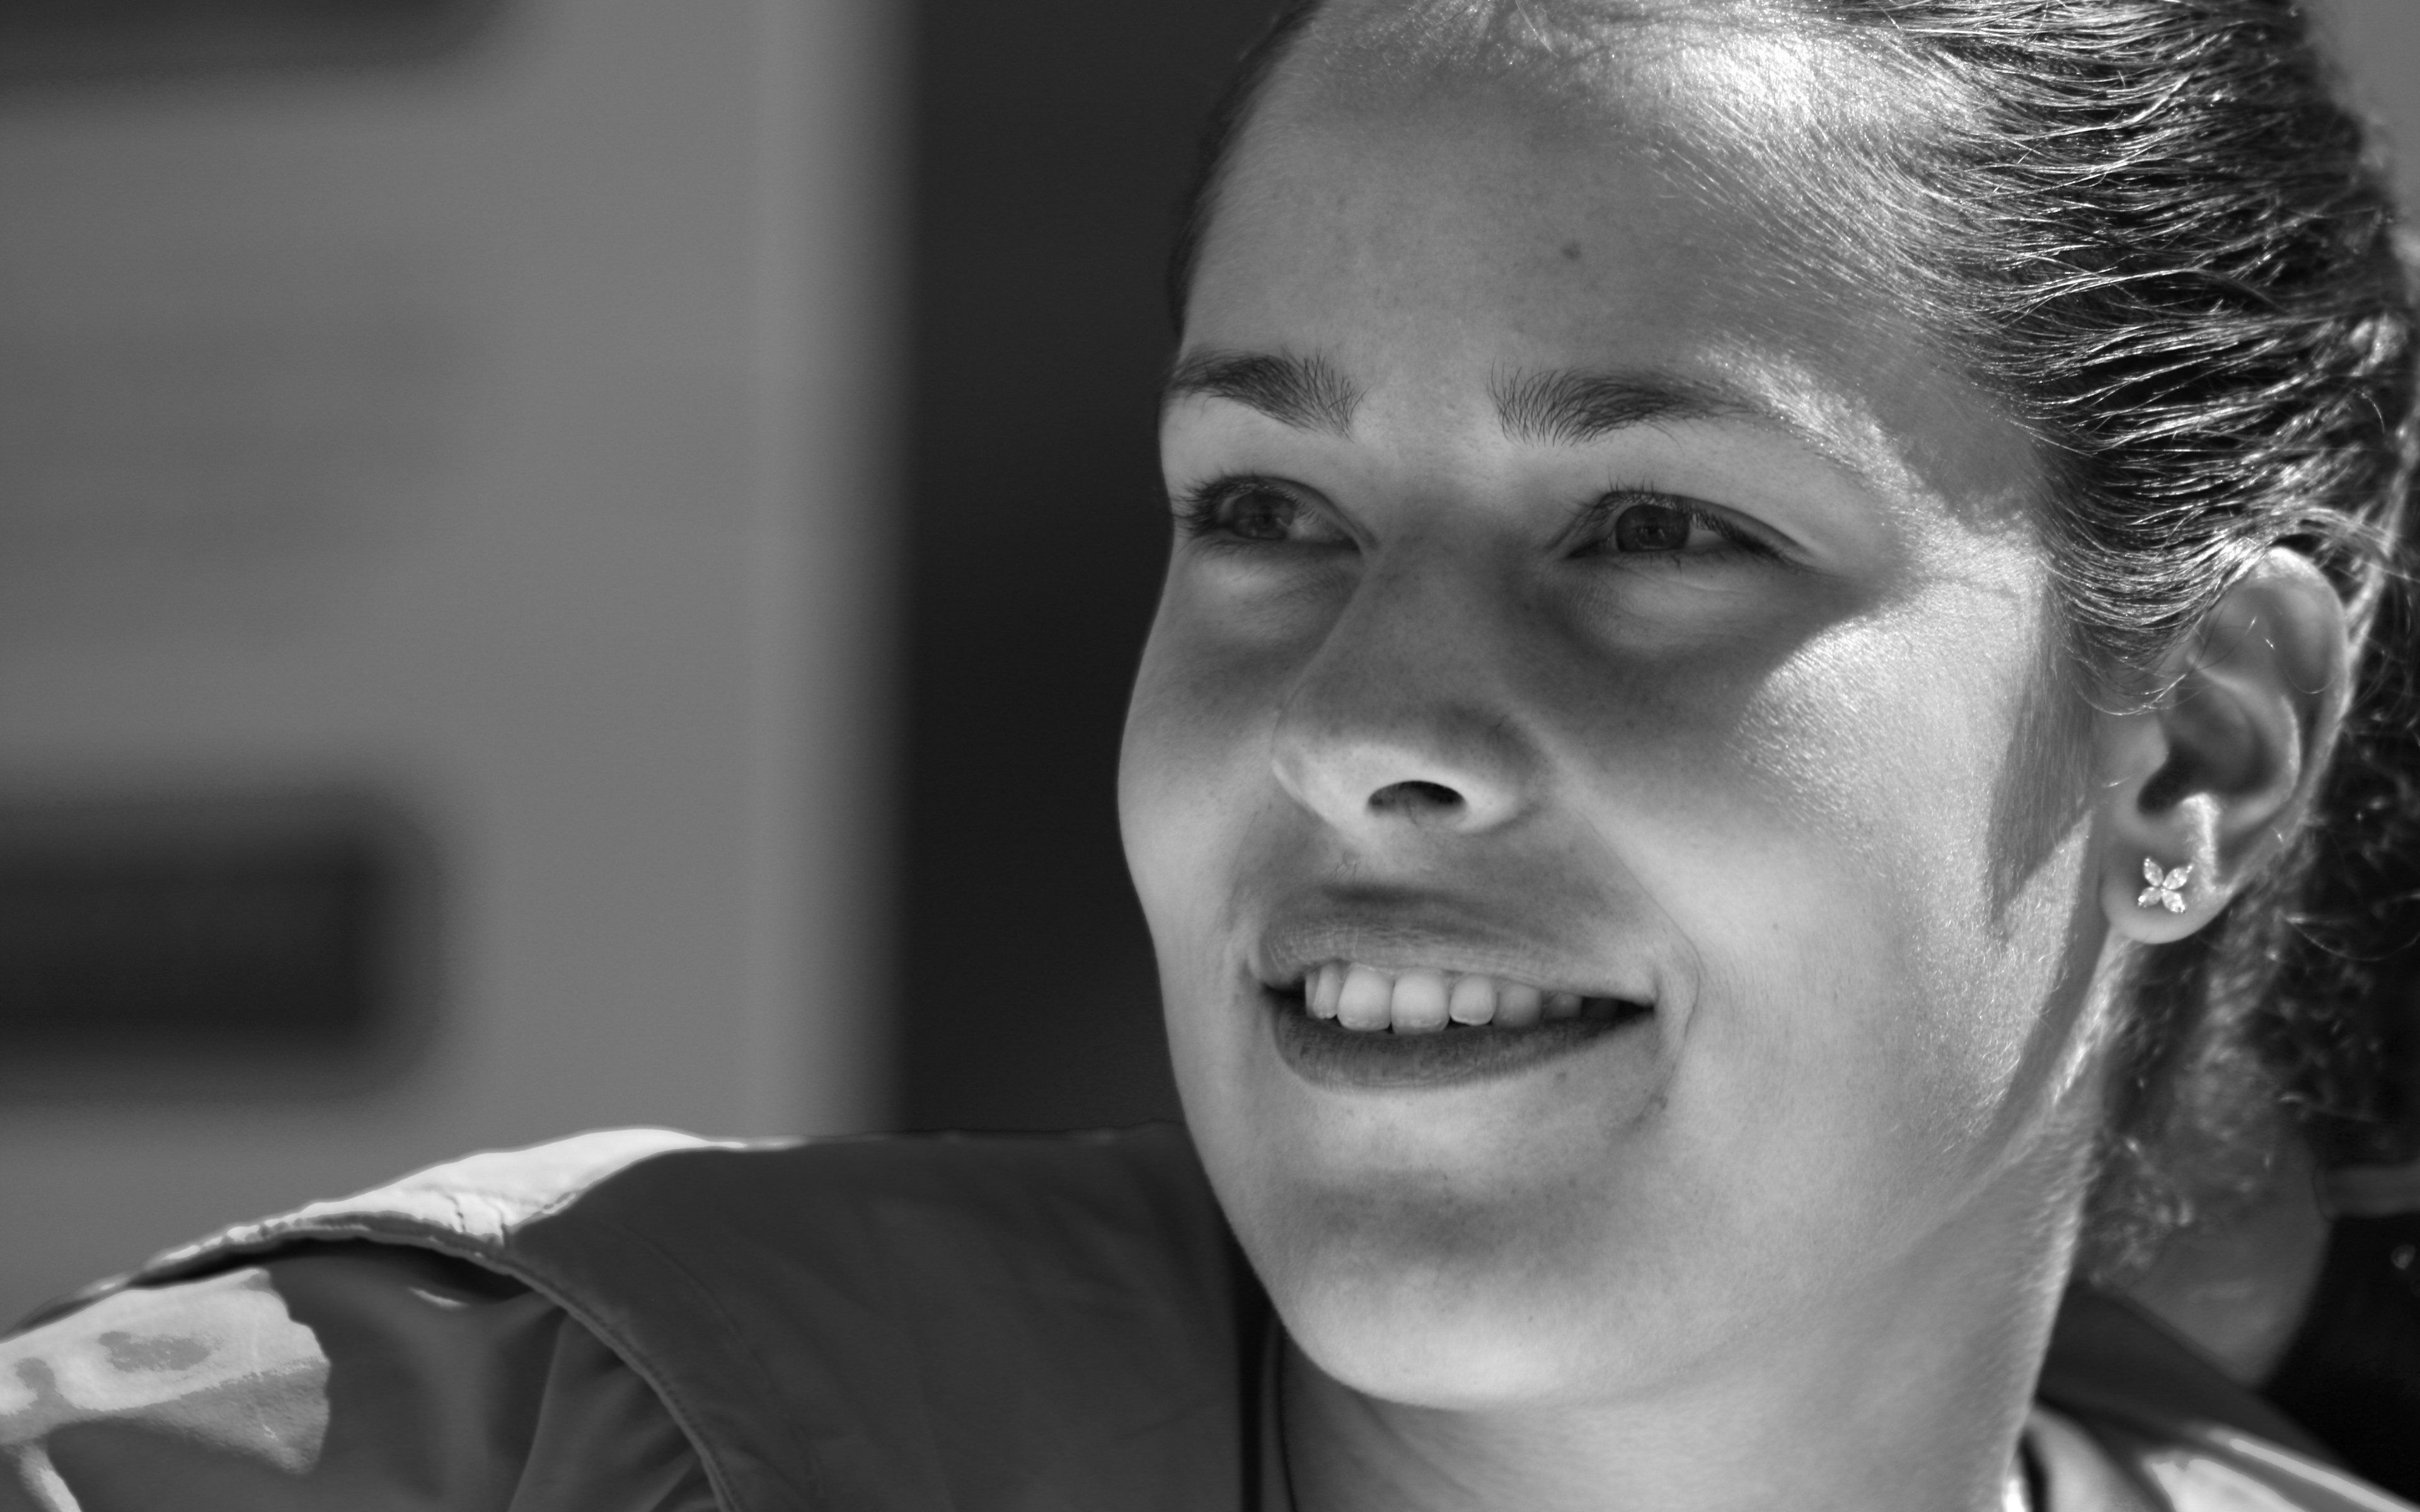 Ana Ivanovic Black and White for 3840 x 2400 Widescreen resolution